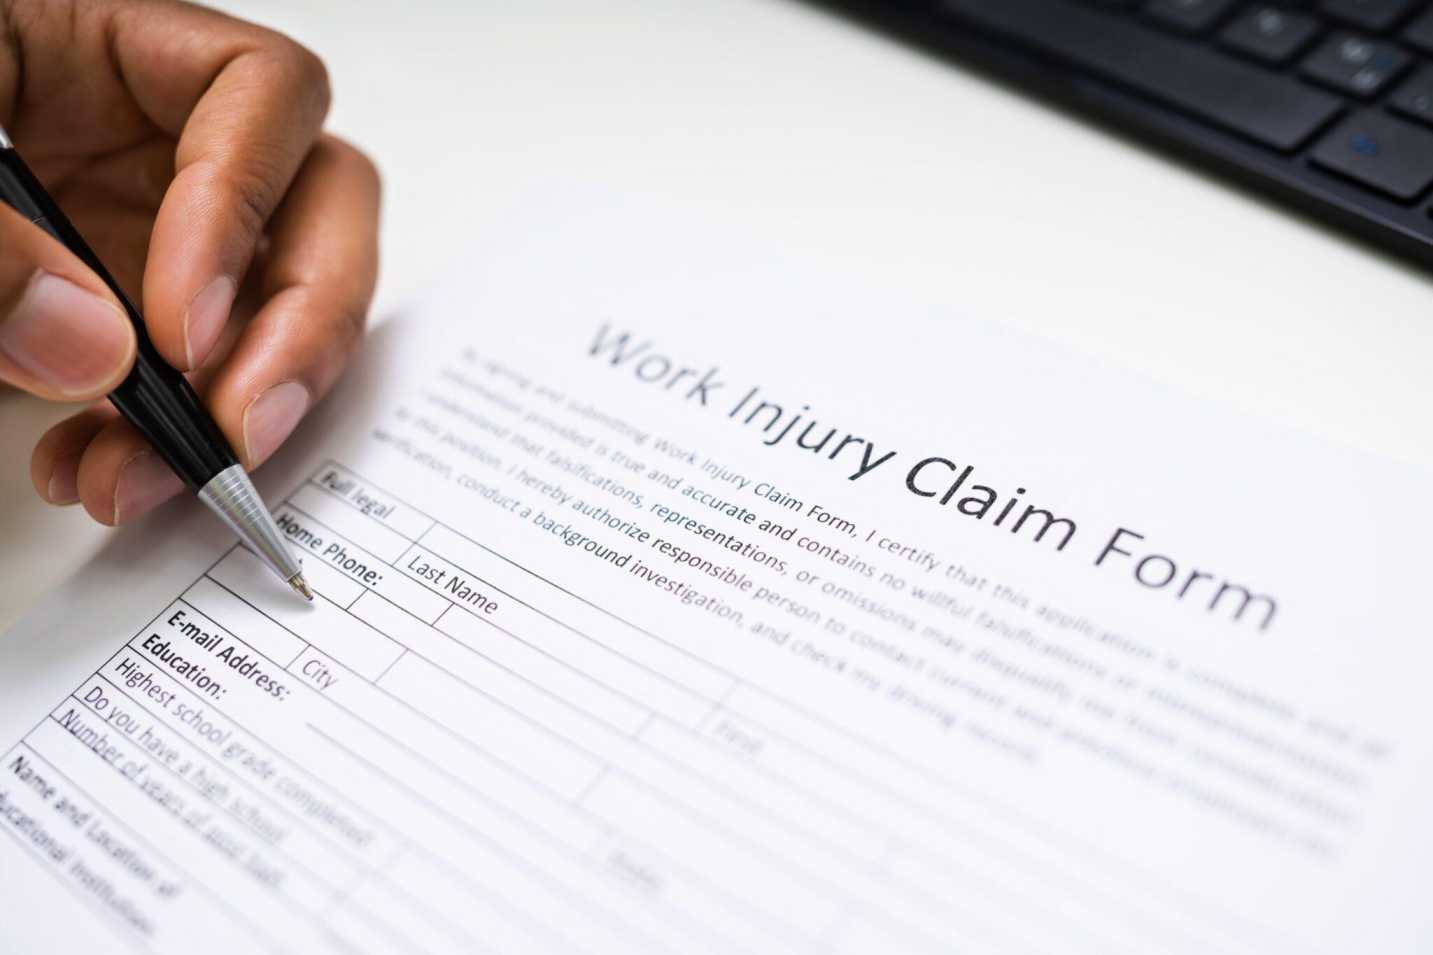 A man filling Work injury claim form at Cherry Hill, NJ